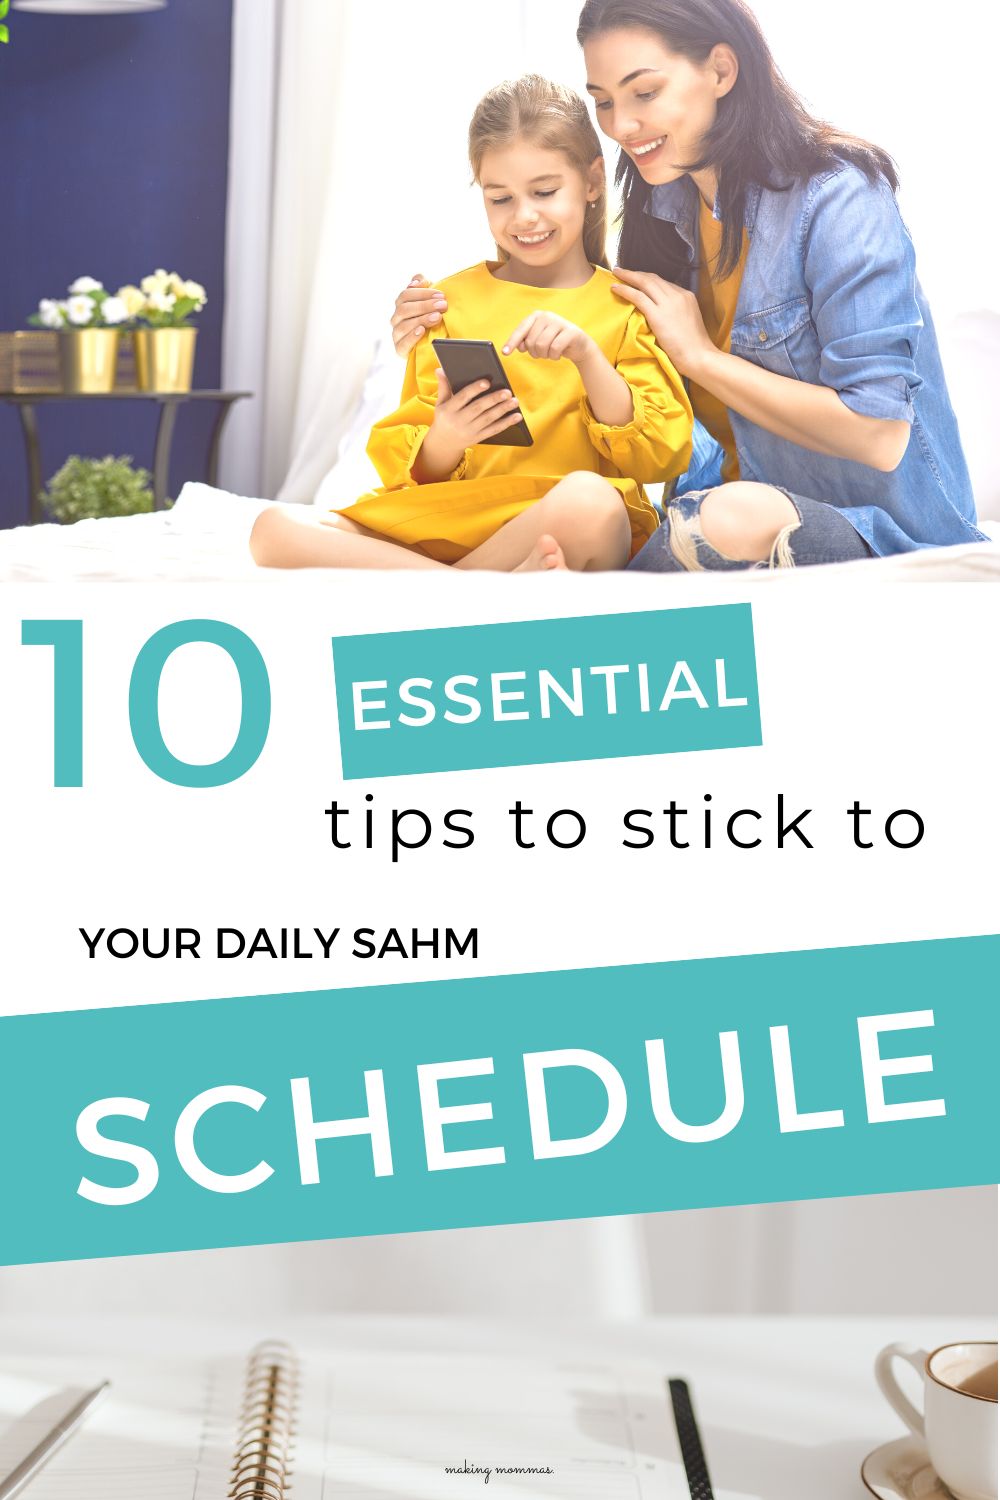 Pin image titled "10 essential tips to stick to your daily sahm schedule" with an image of a mom and a daughter looking at a phone on a bed